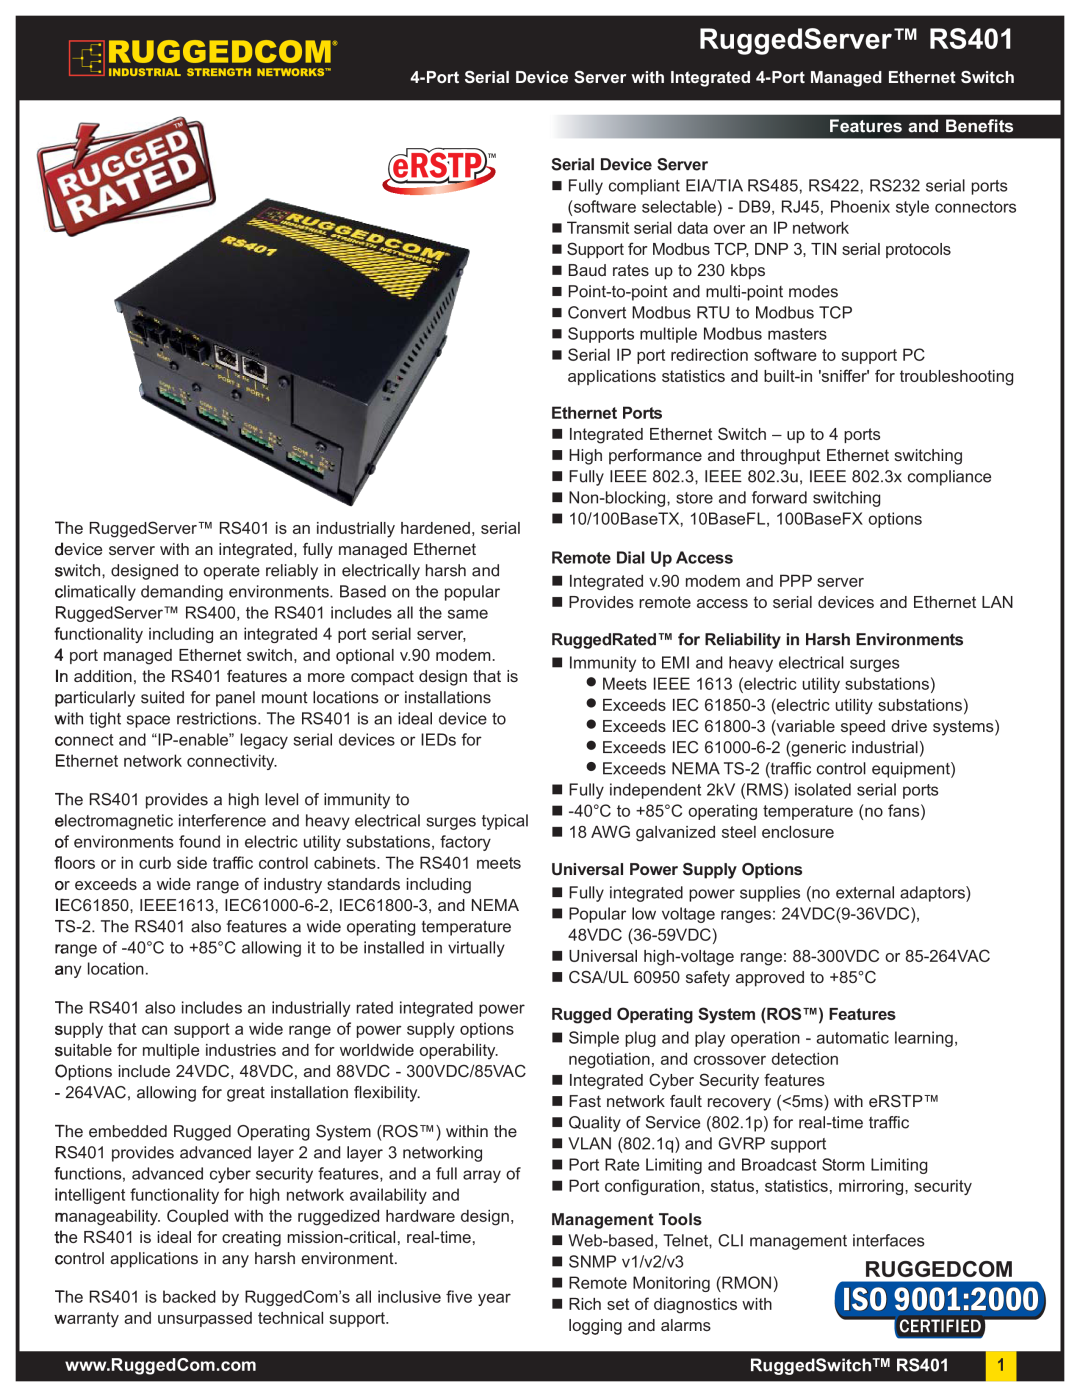 RuggedCom warranty RuggedServer RS401, Features and Benefits, Serial Device Server, Ethernet Ports, Management Tools 